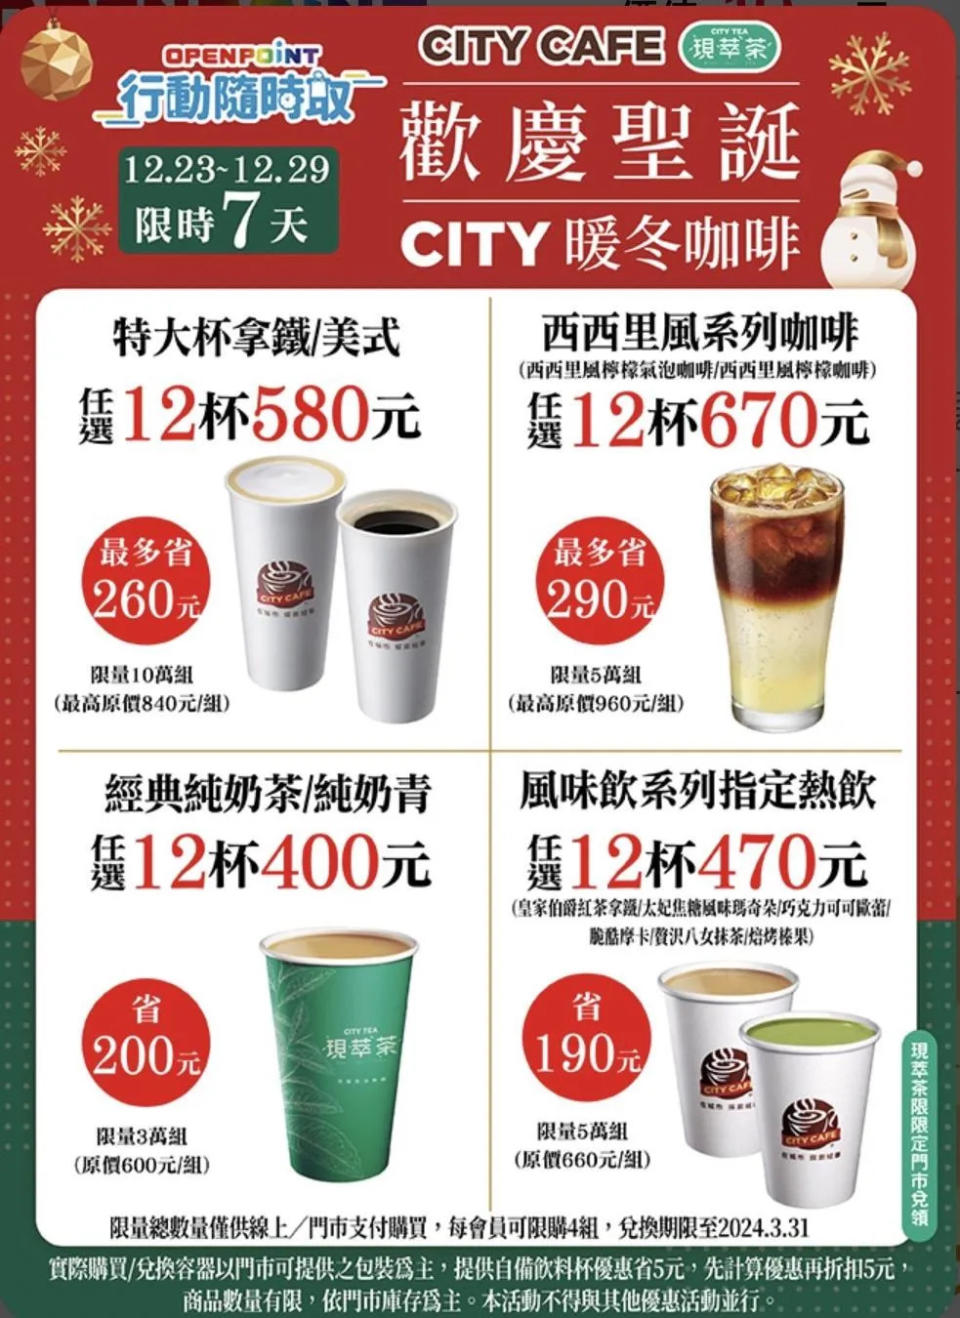 <strong>7-11推出多項飲品優惠。（圖／業者提供）</strong>